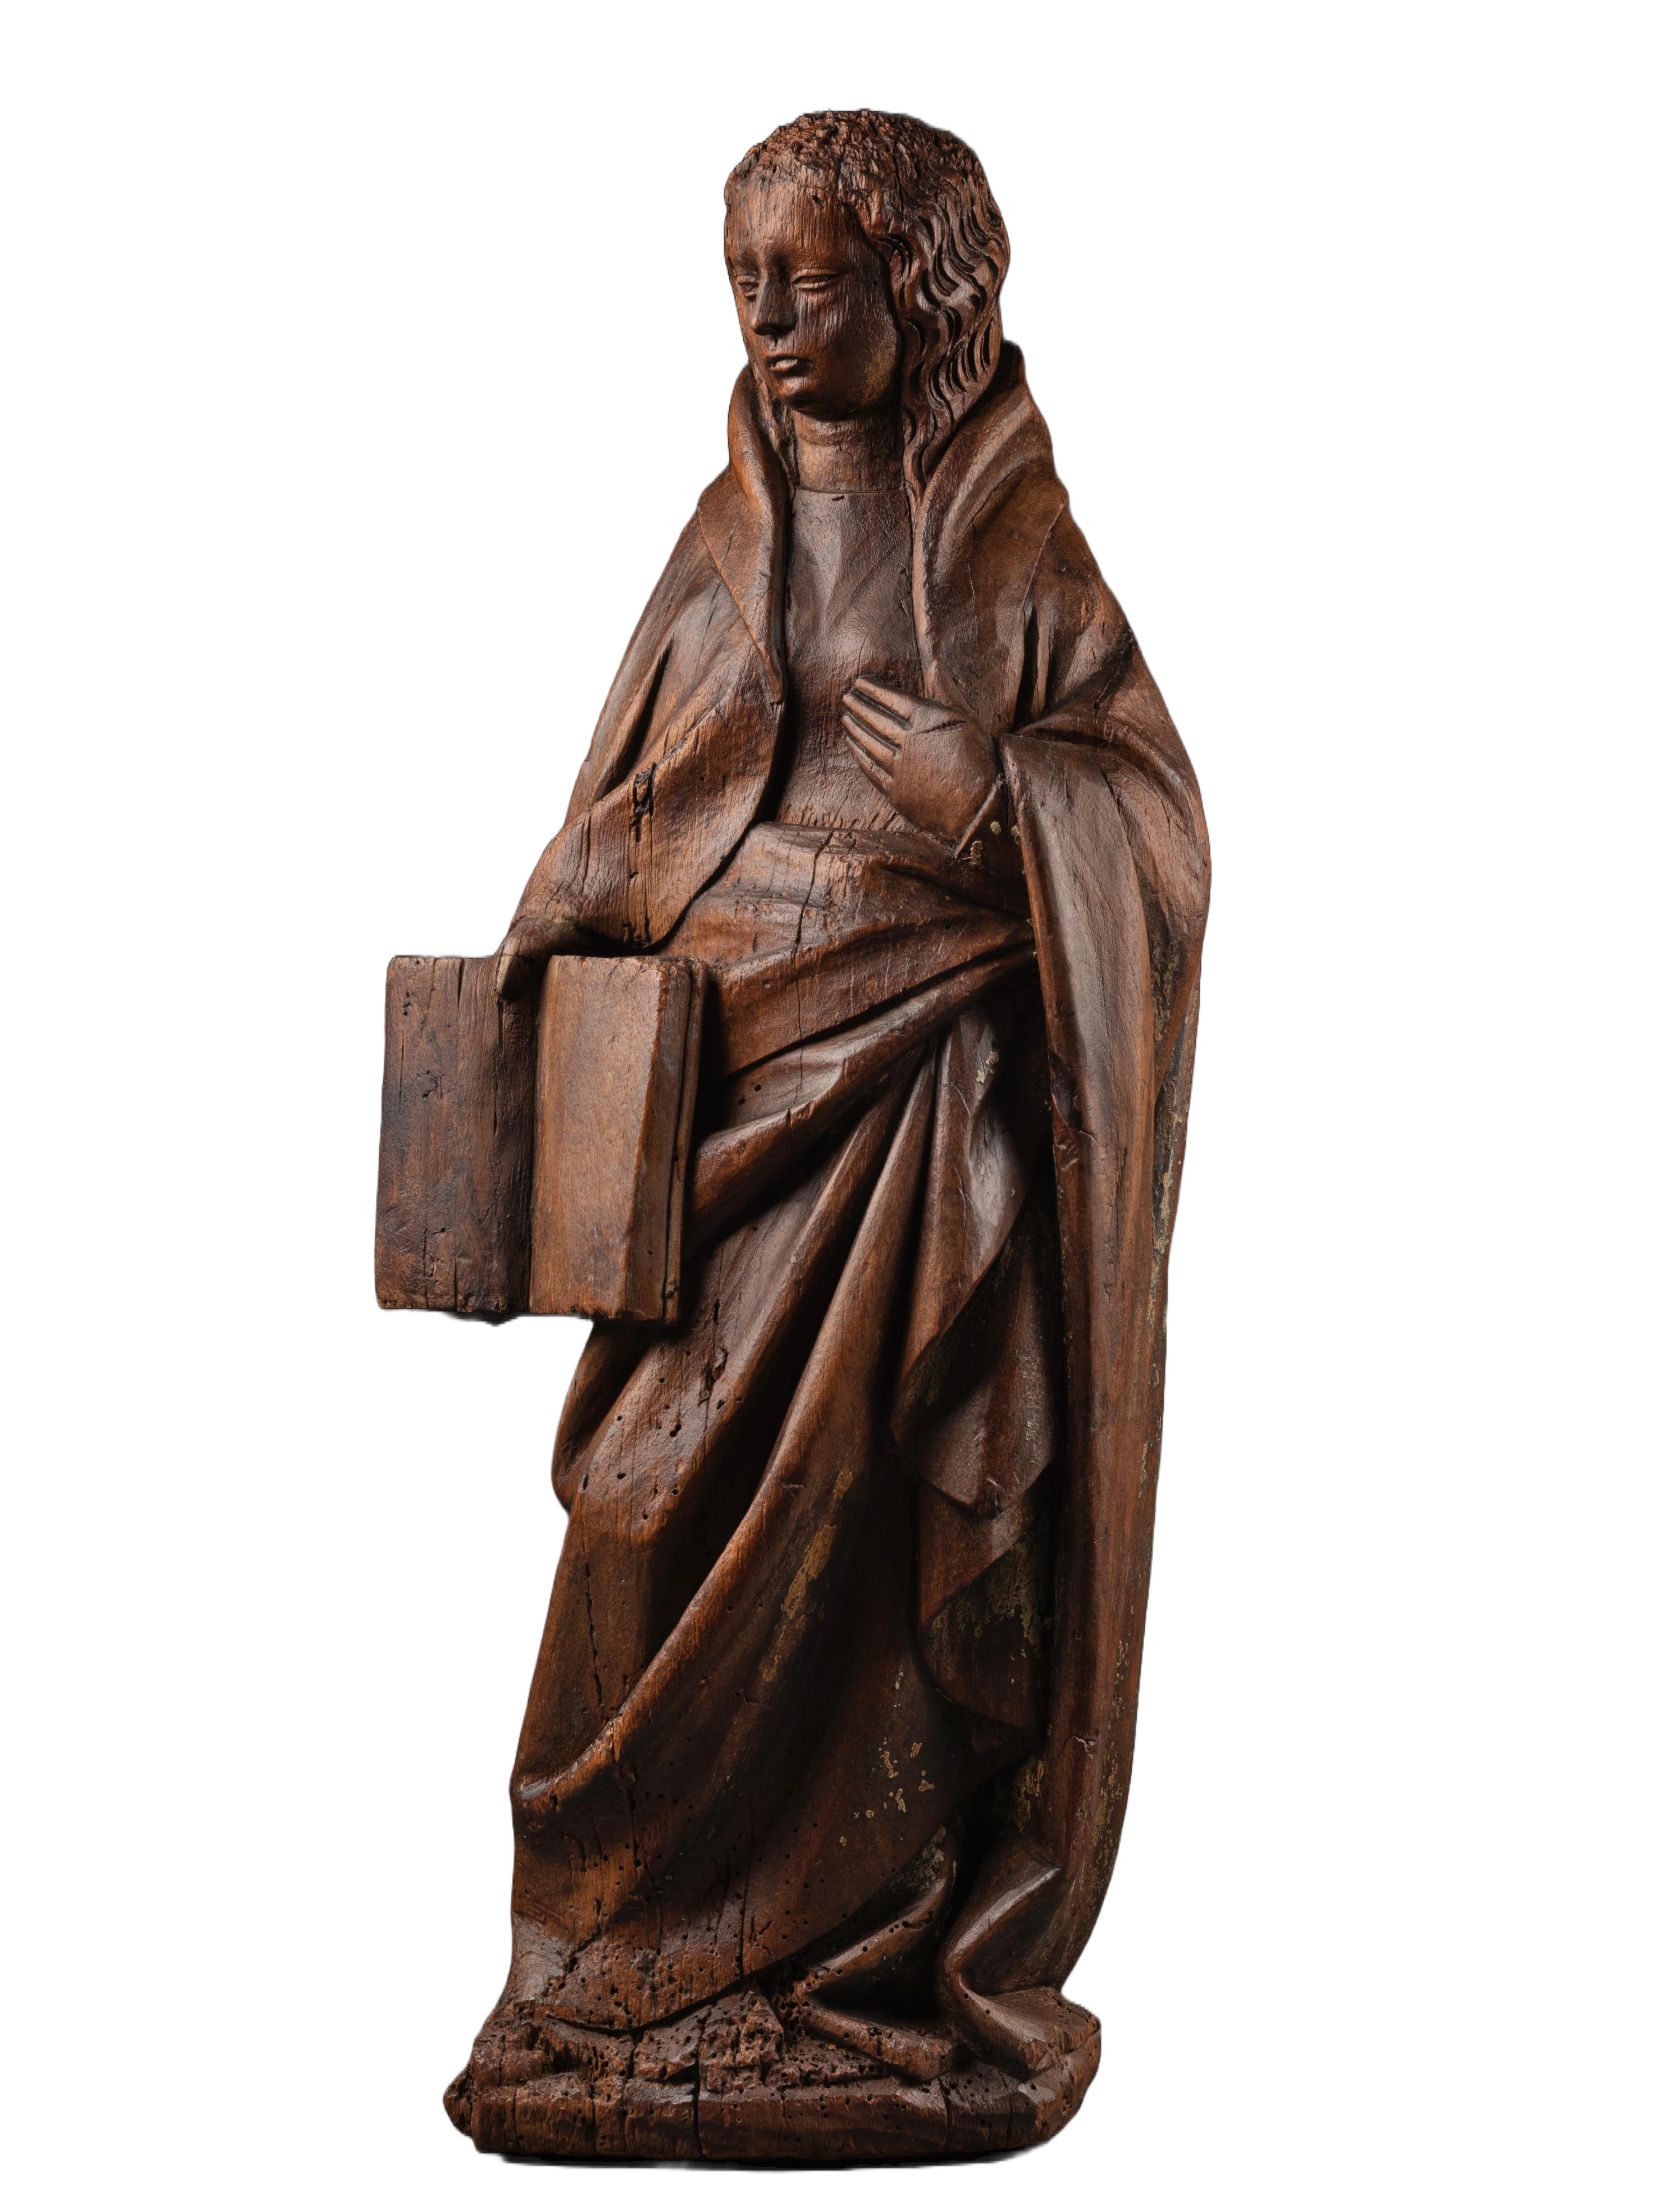 Claus de Werve Figurative Sculpture - Virgin of the Annunciation, Burgundy, early 15th century